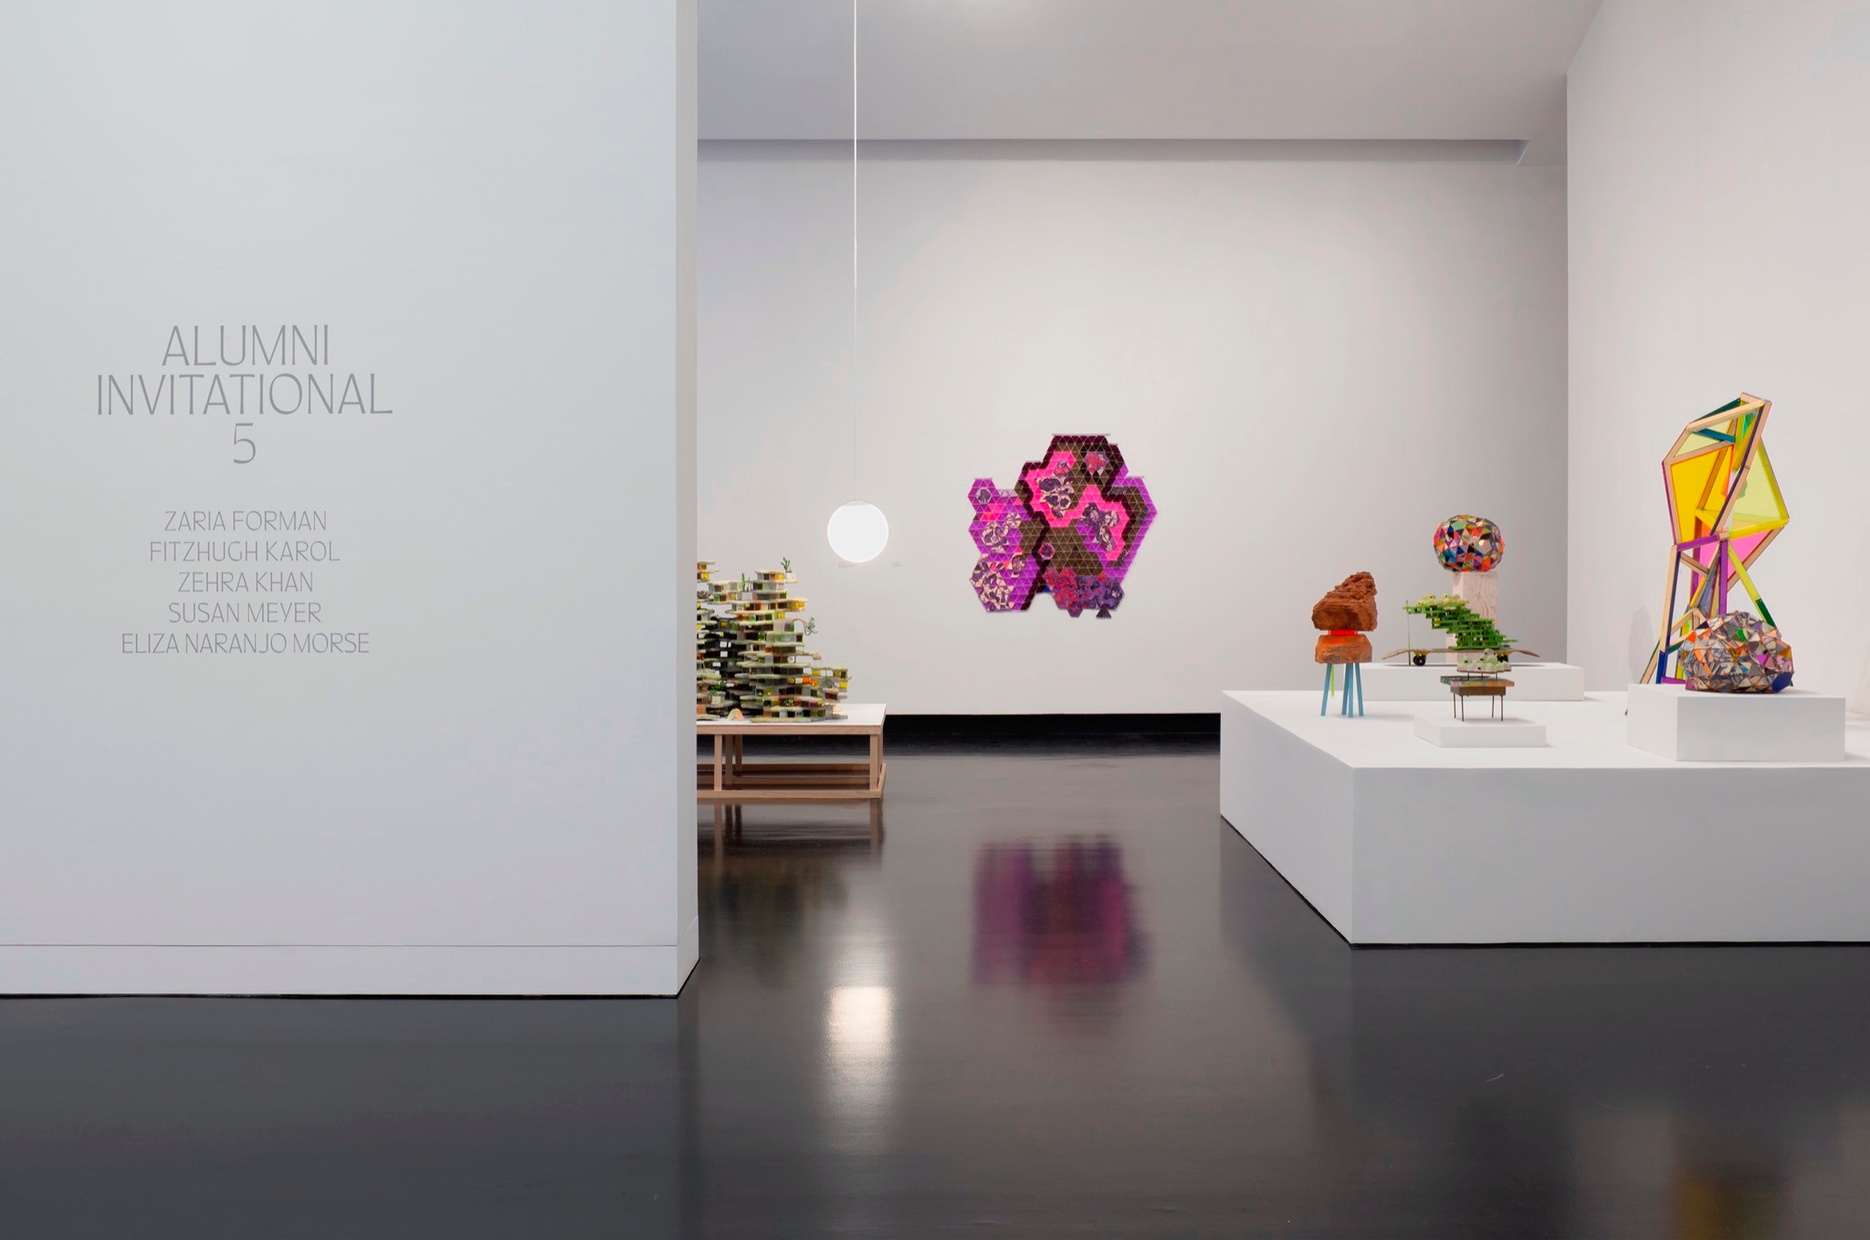 An interior of a museum gallery with one wall showing the title Alumni Invitational 5, with a number of colorful sculptures sitting on various plinths, and hung on the wall.